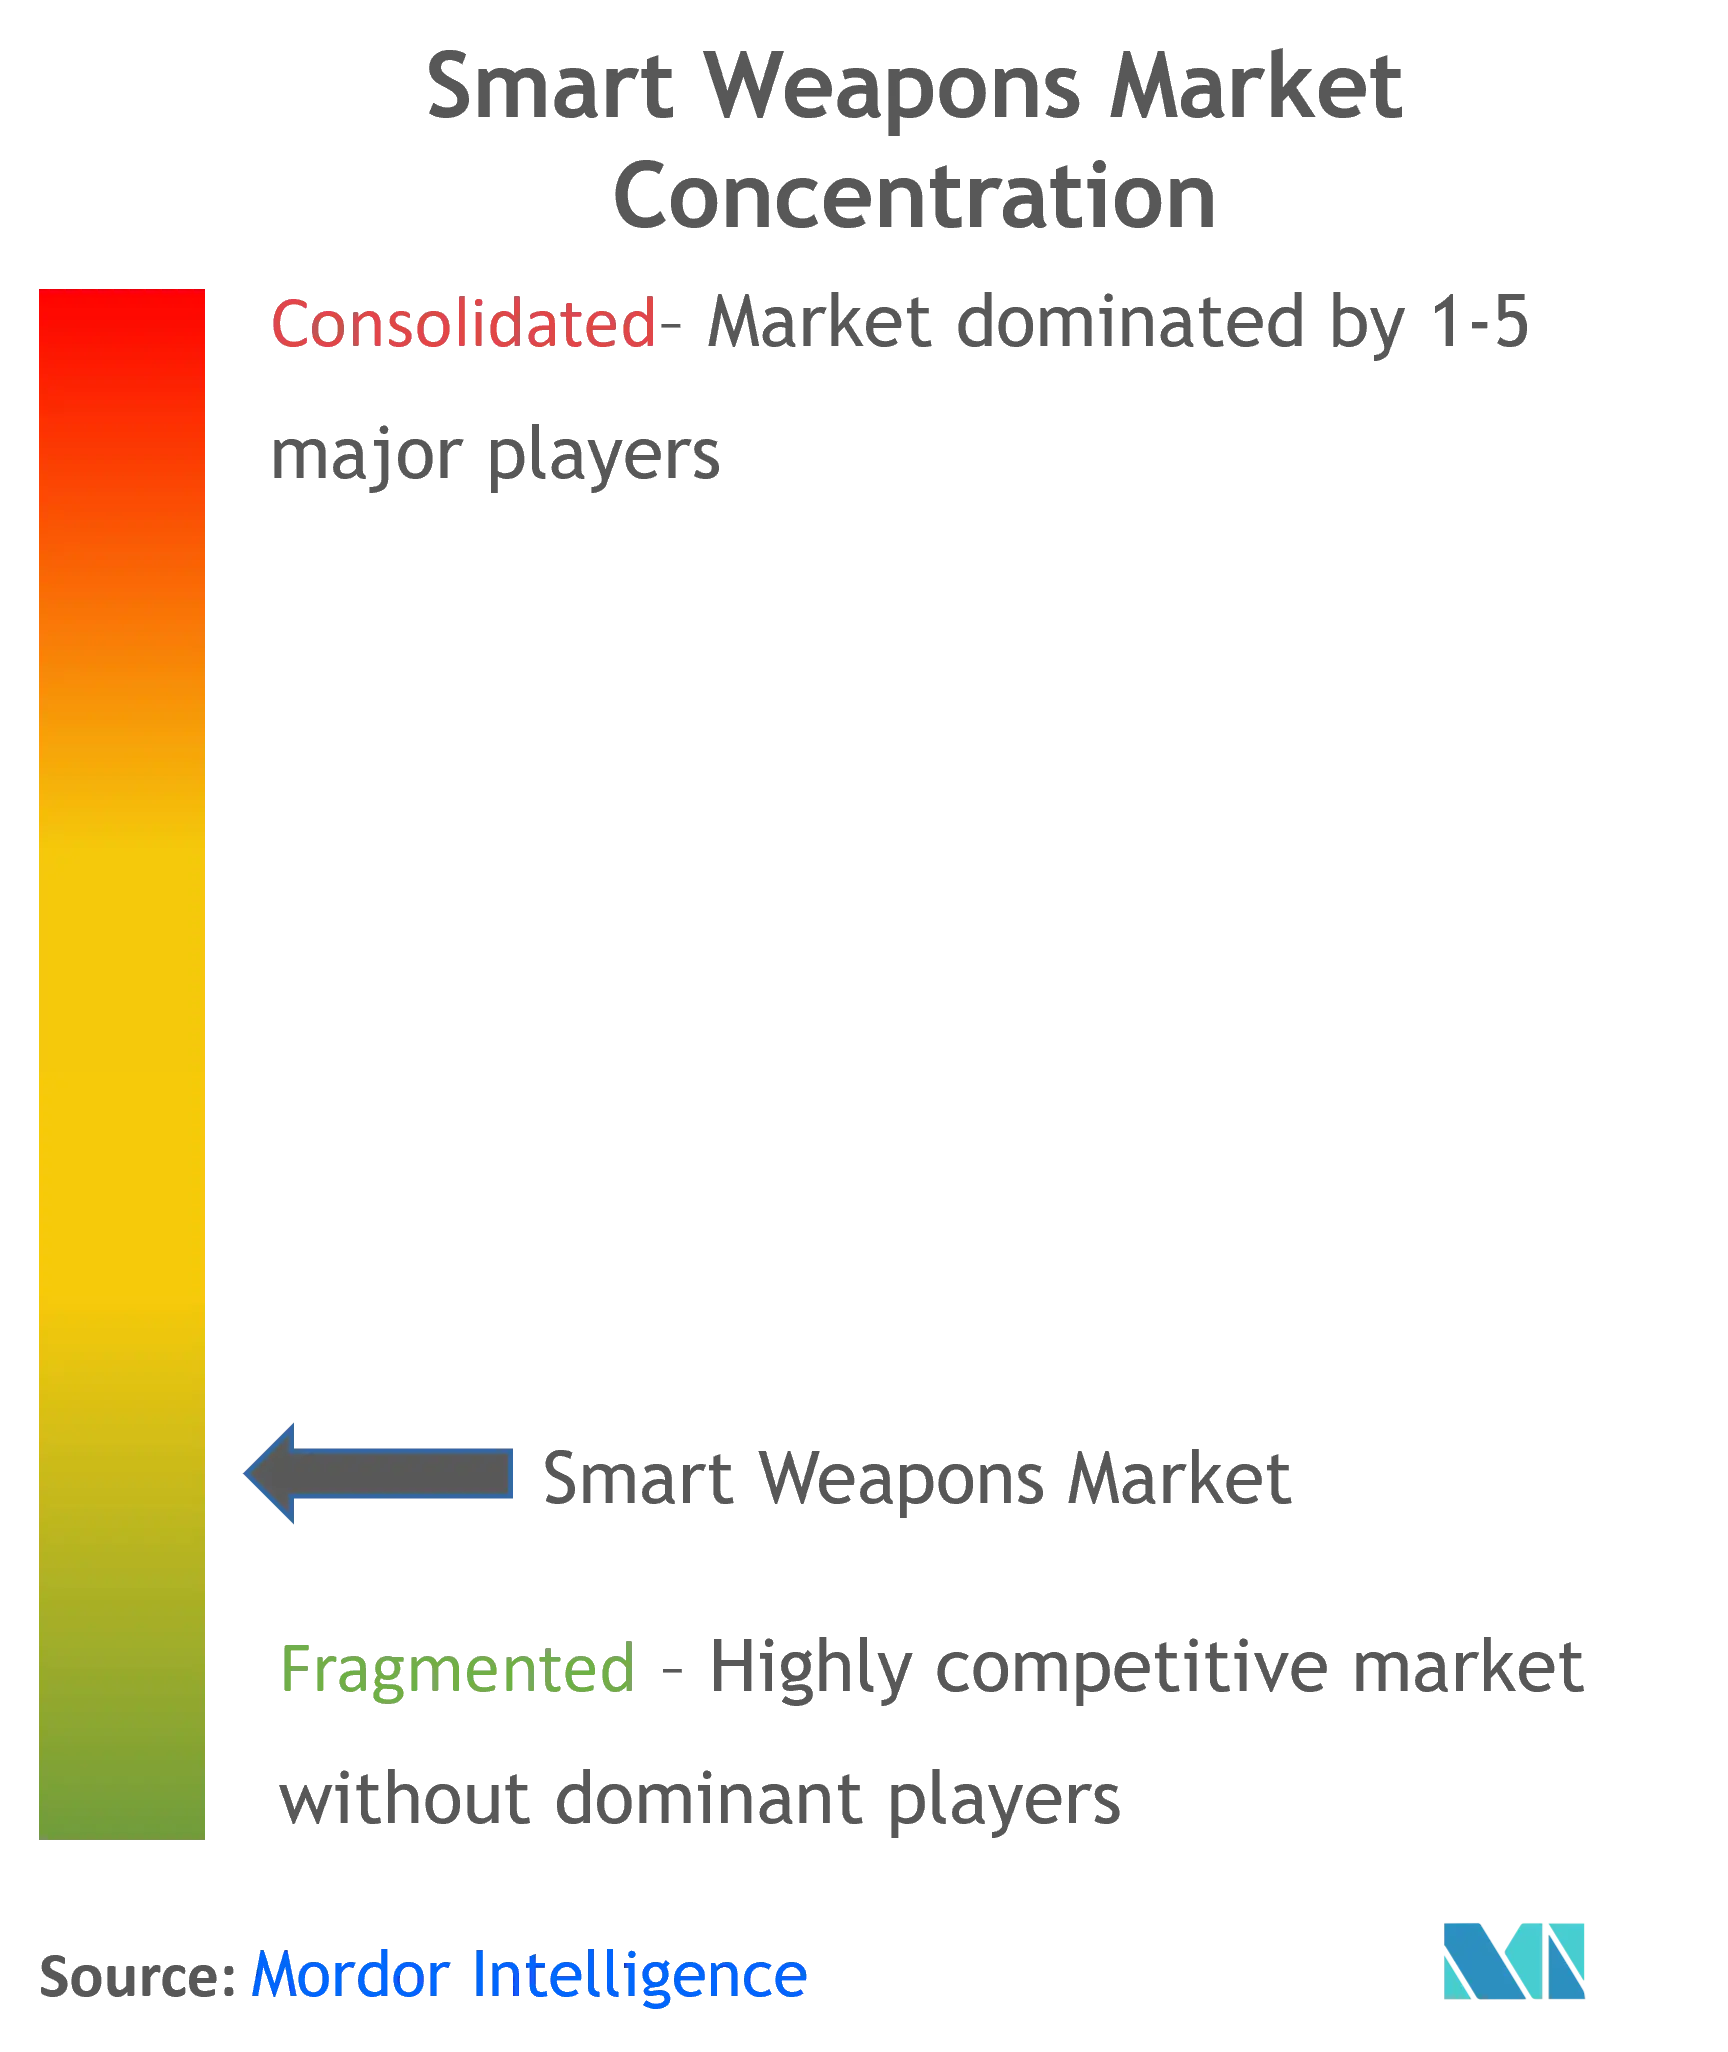 Smart Weapons Market Concentration